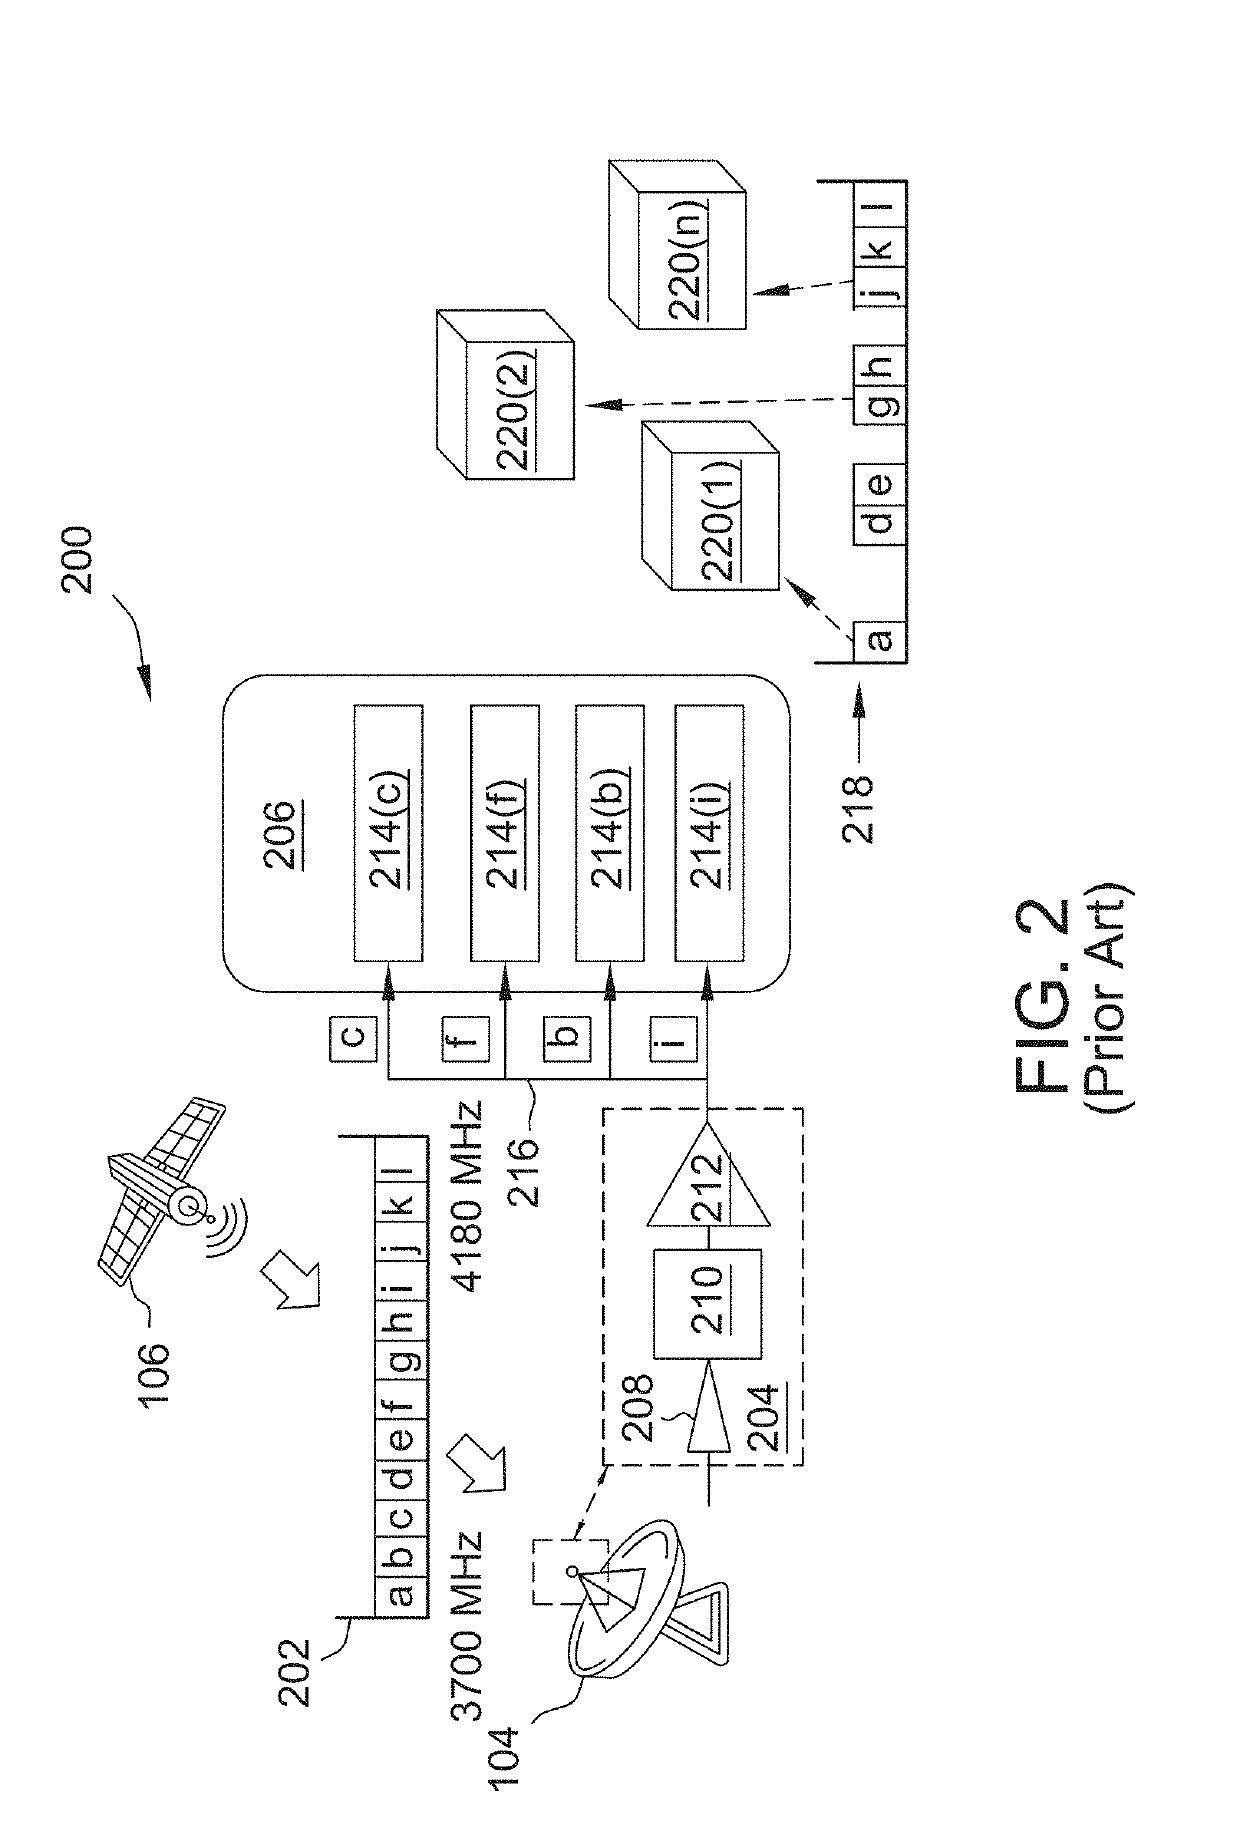 Systems and methods for interference detection in shared spectrum channels